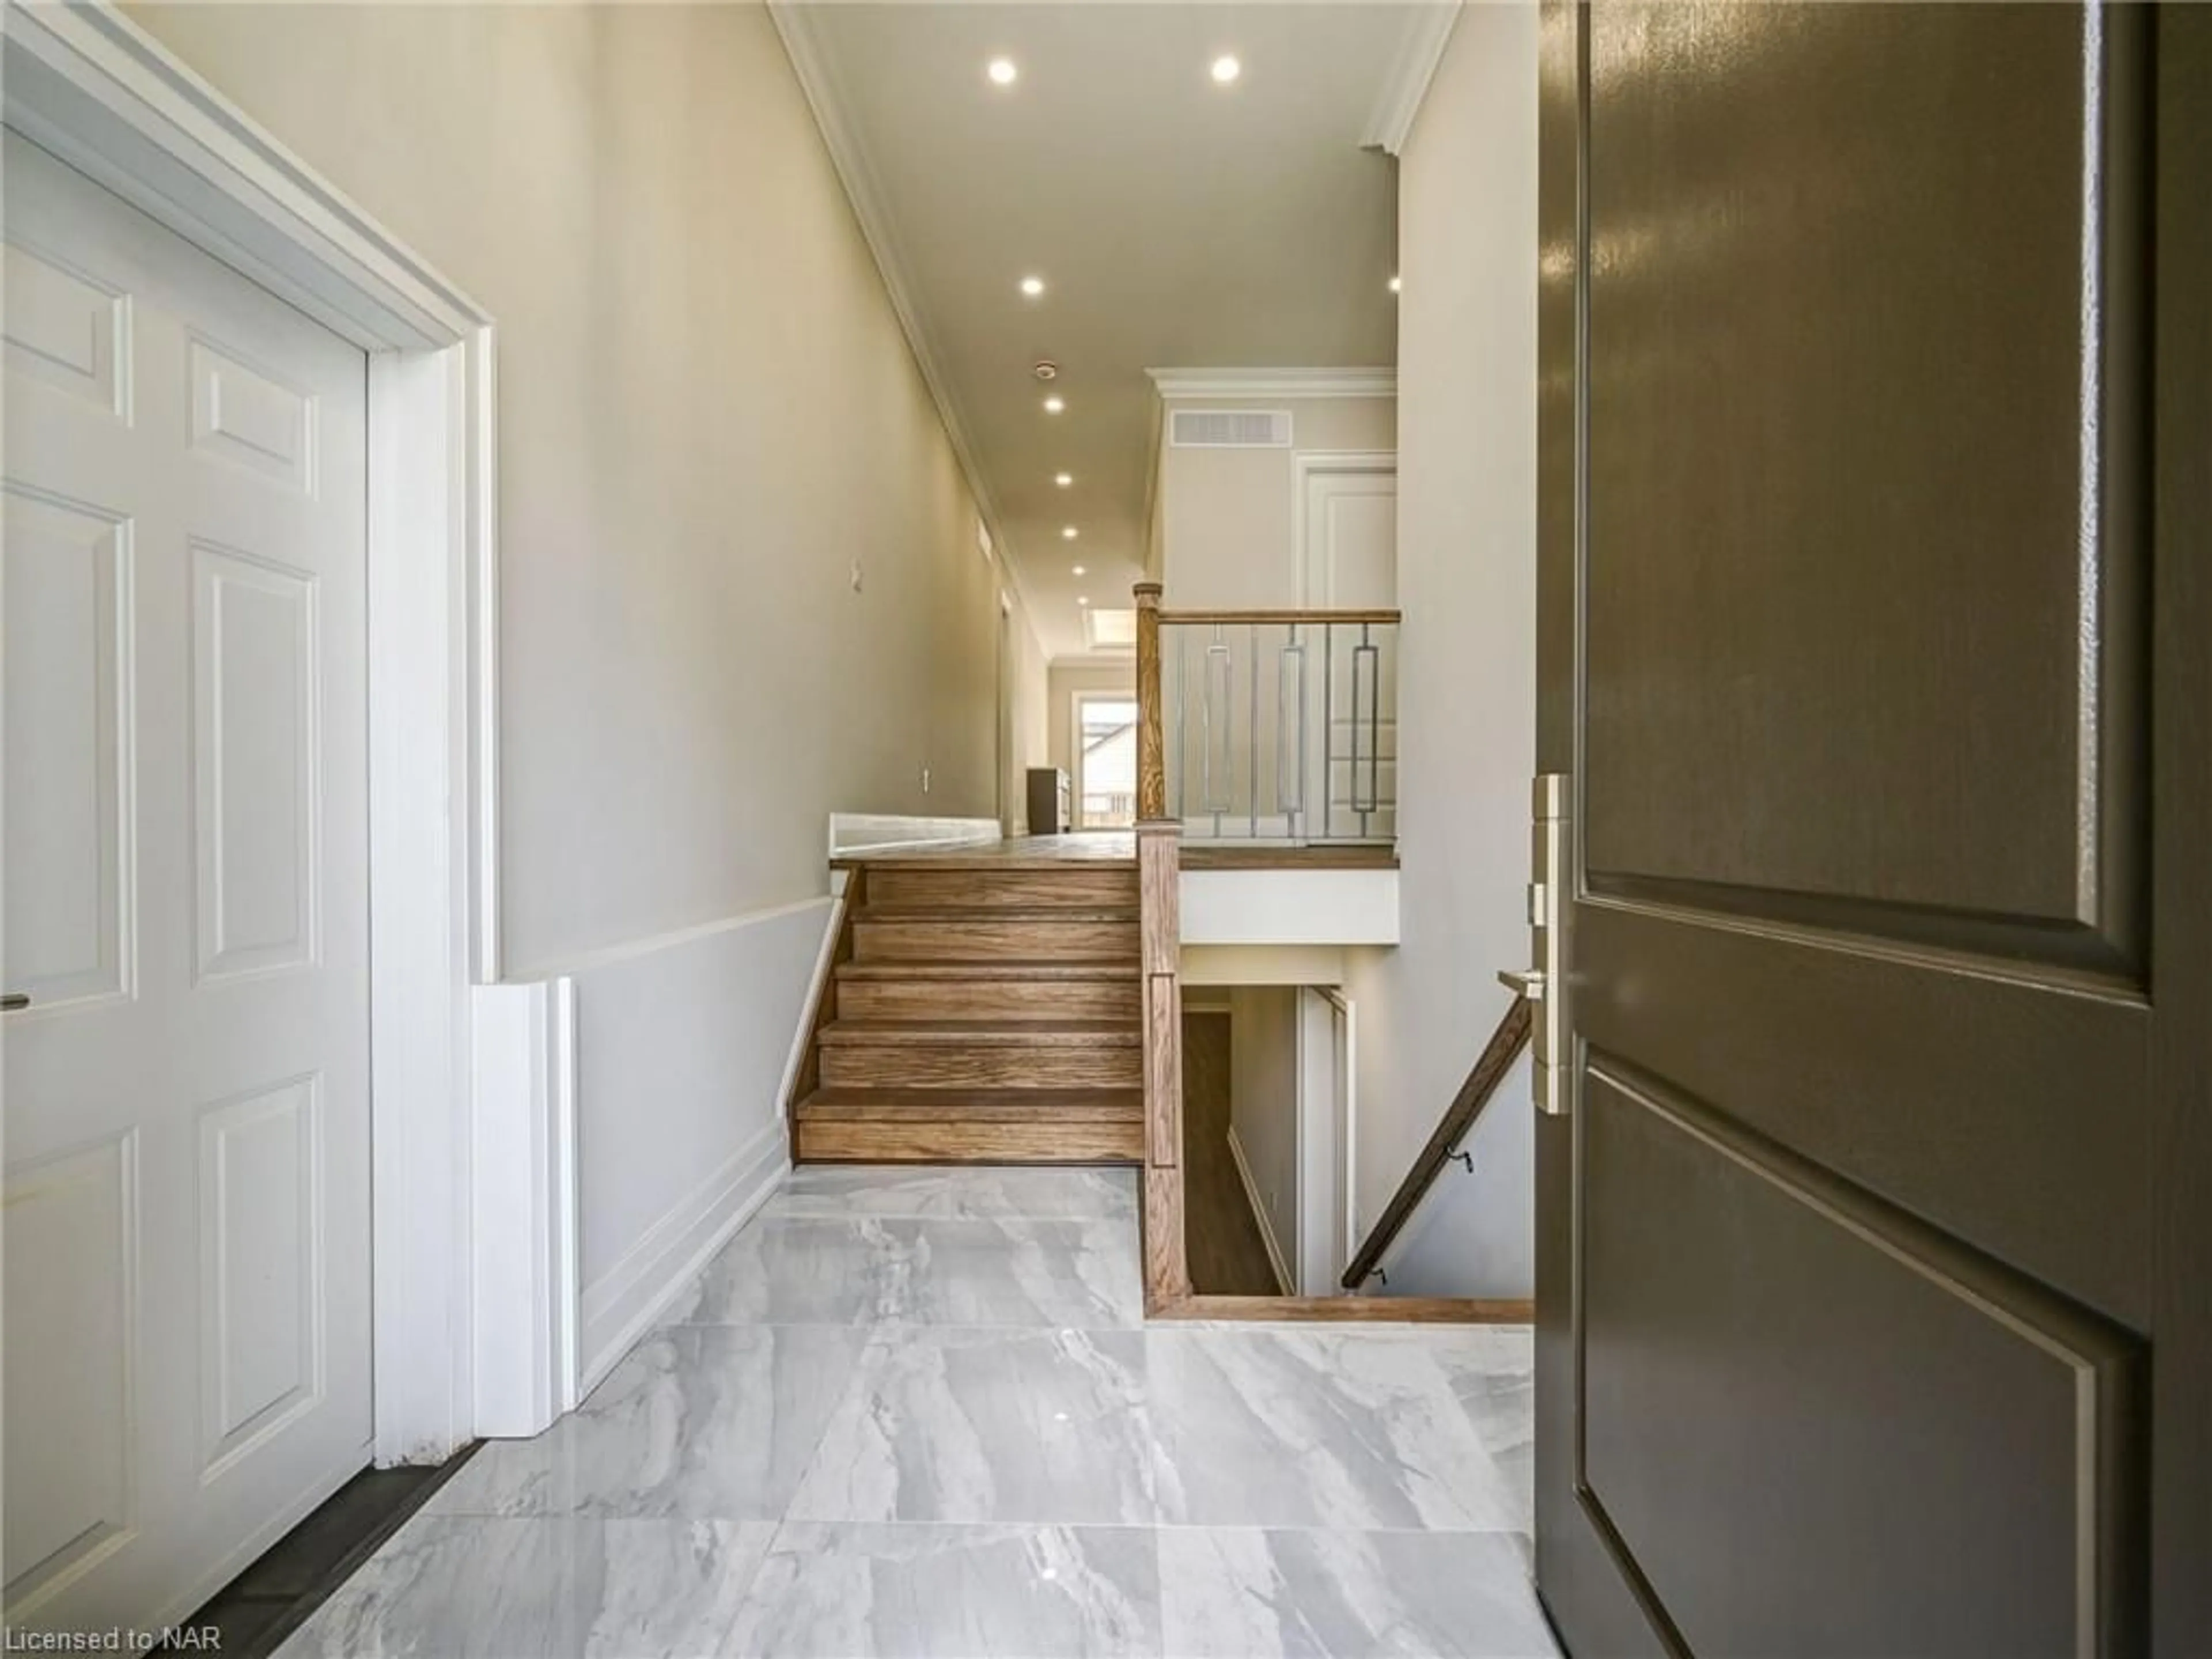 Indoor foyer for 87 The Promenade, Niagara-on-the-Lake Ontario L0S 1J0